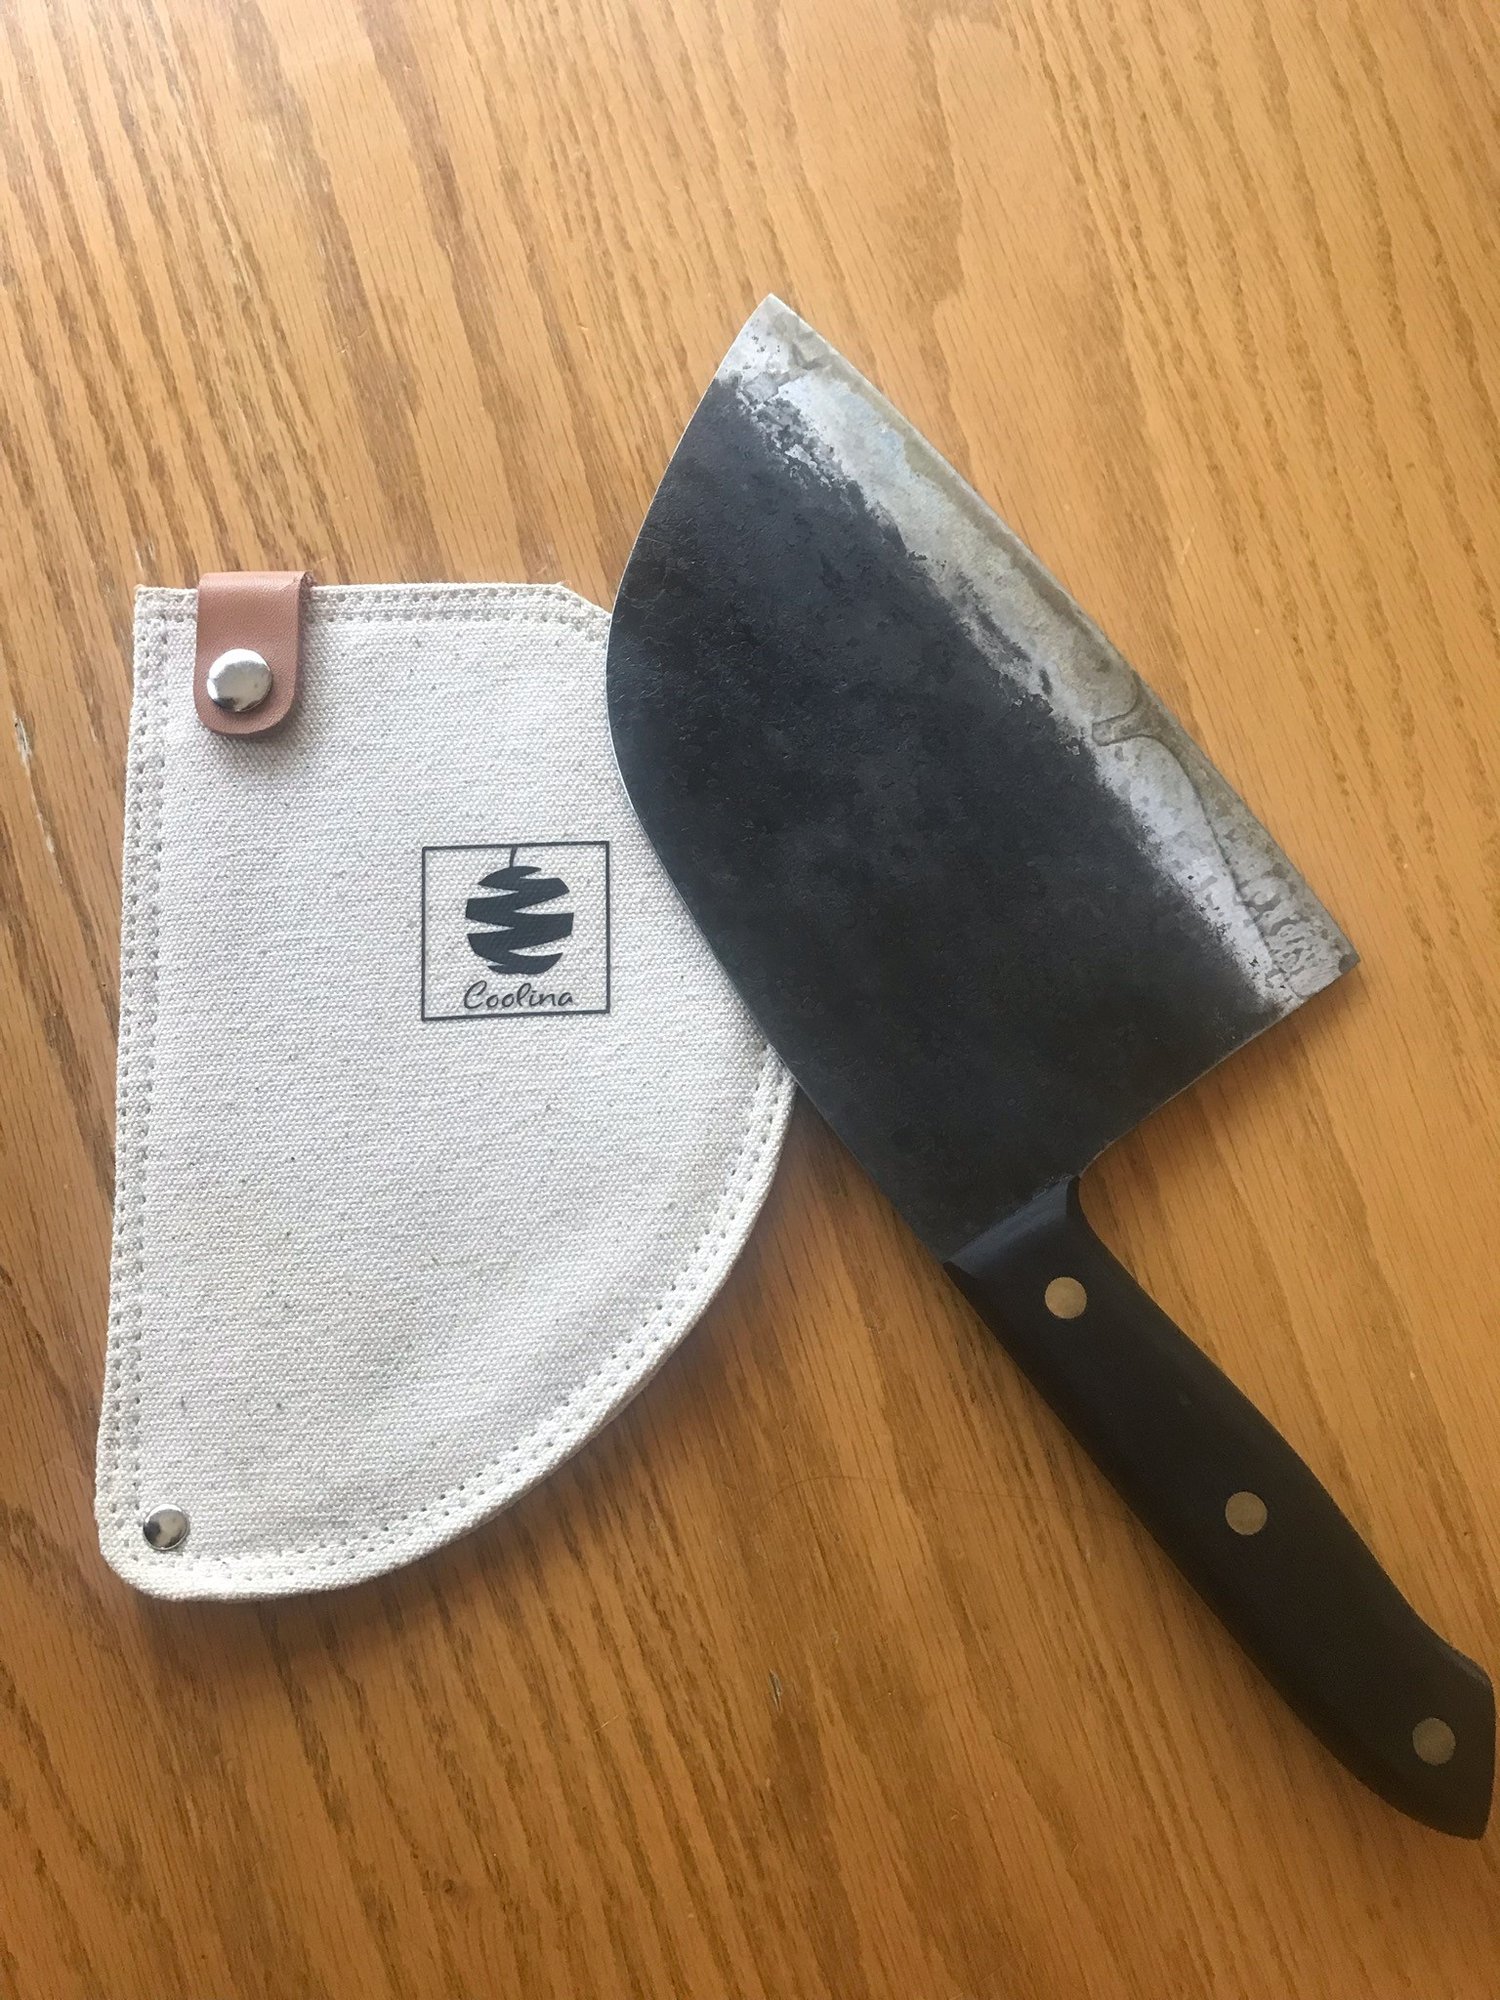 The Coolina Knife — The Other Side of the Spatula